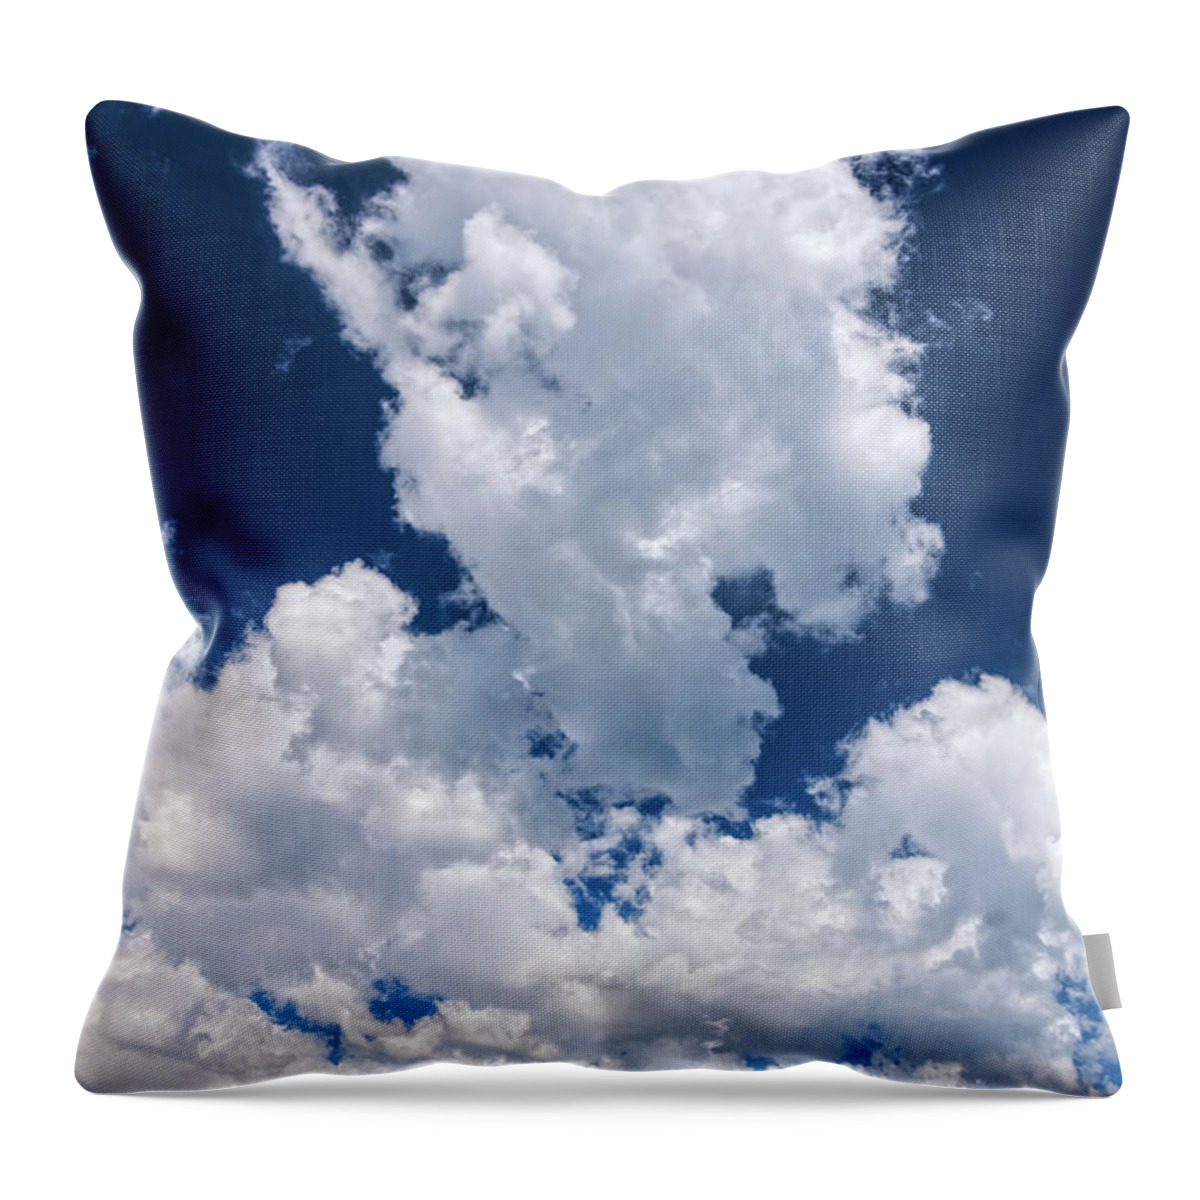 Cloud Formations Throw Pillow featuring the photograph Evanescent Water Vapor by Bijan Pirnia